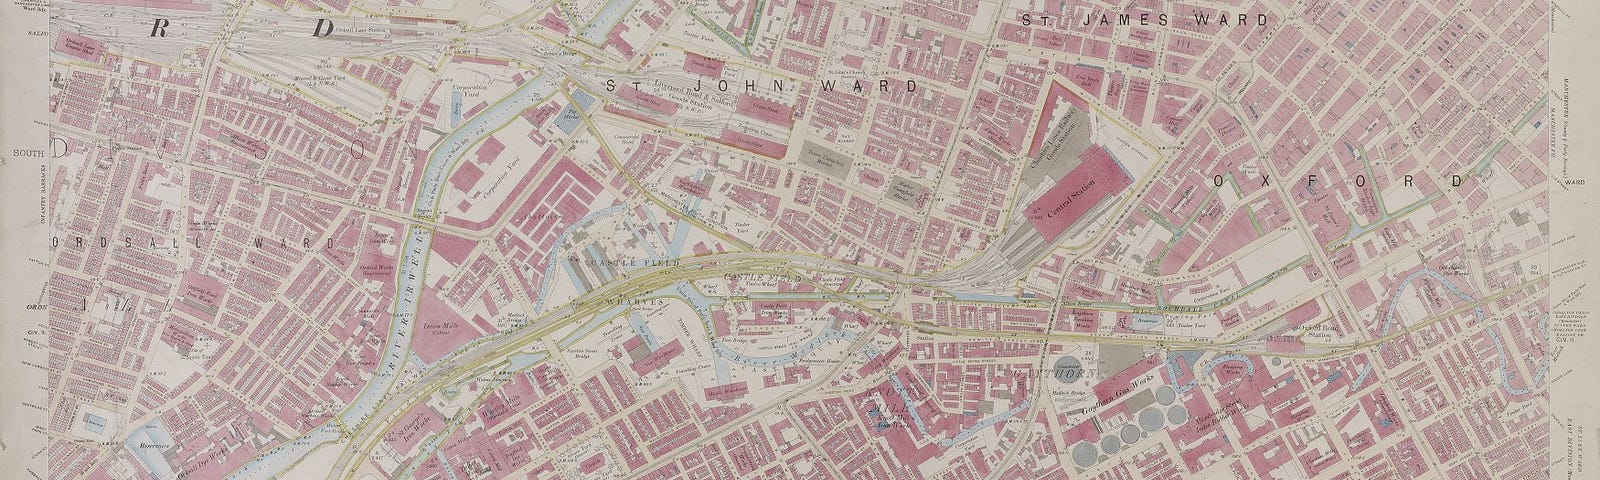 Detailed Ordnance Survey map of Manchester from 1896 featuring Central Station, Castlefield and parts of Hulme.